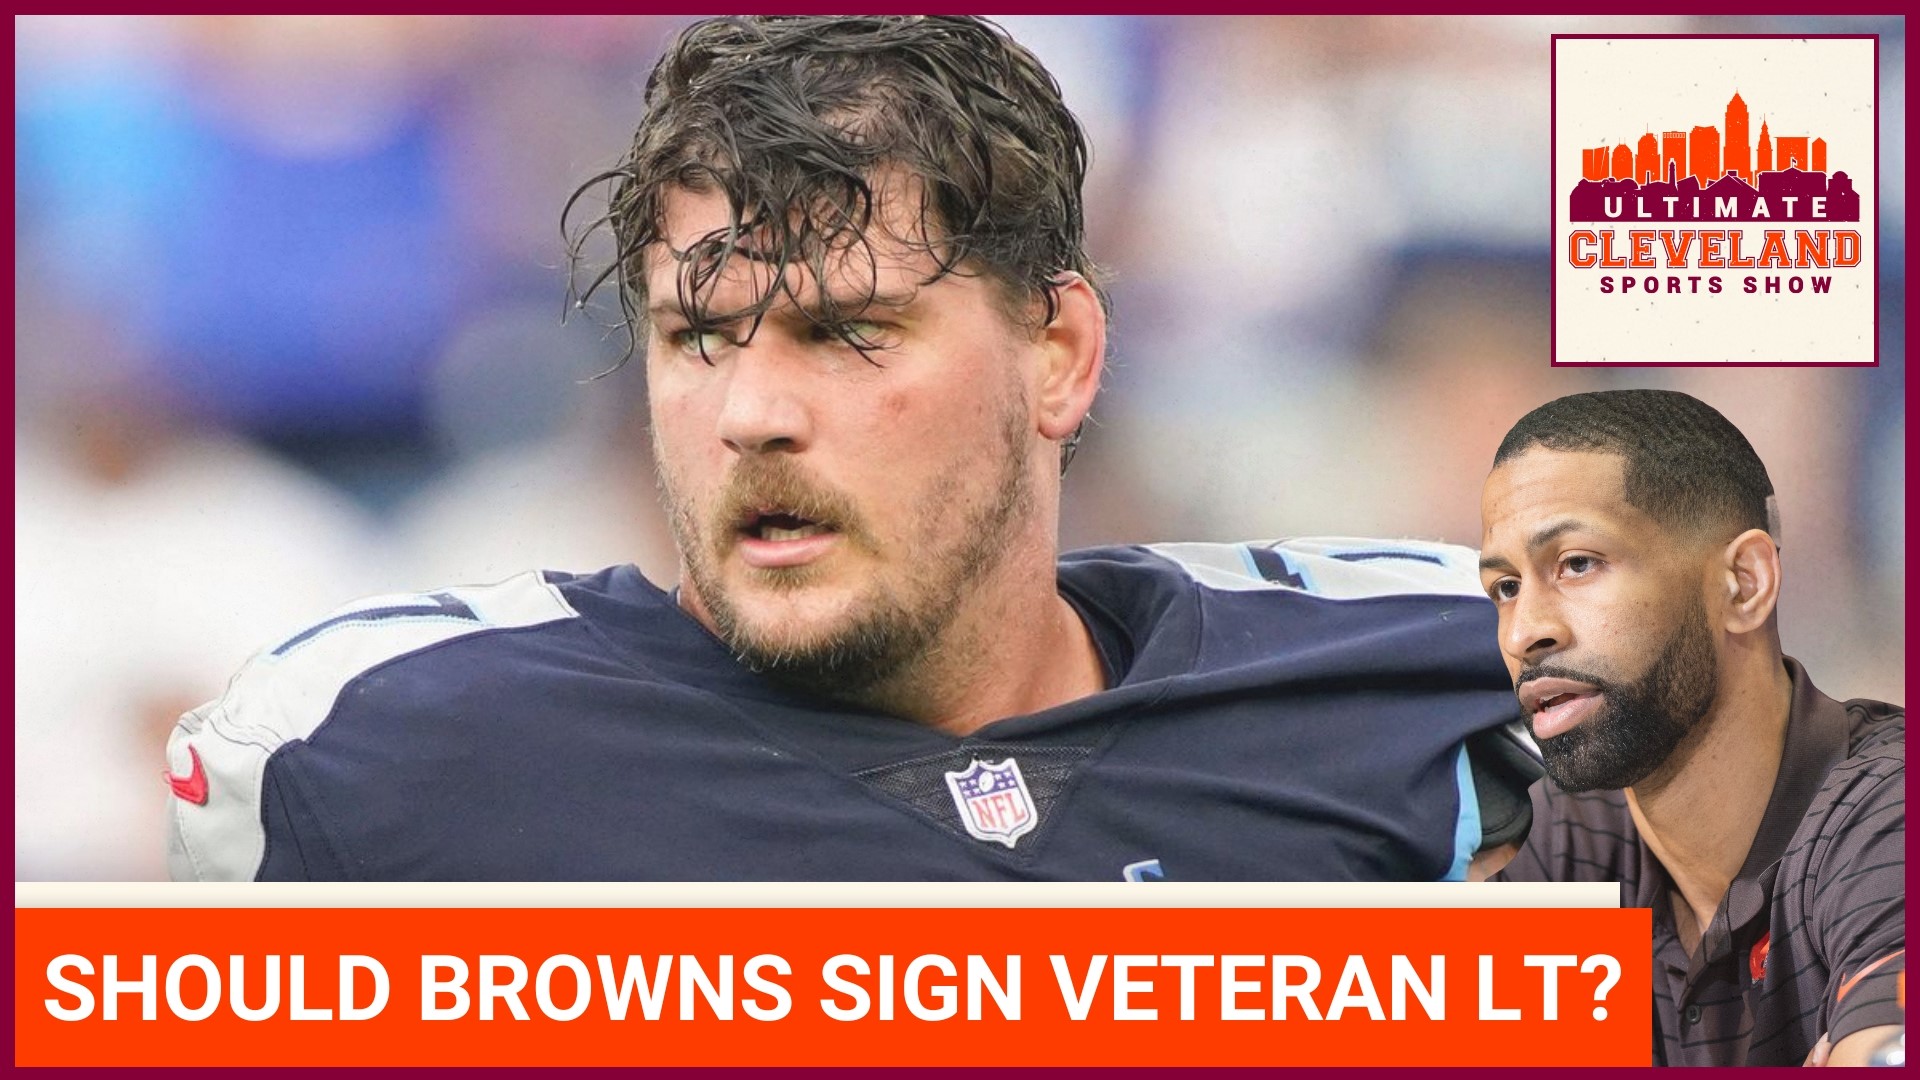 The Tennessee Titans cut veteran LT Taylor Lewan | Should the Browns sign him?